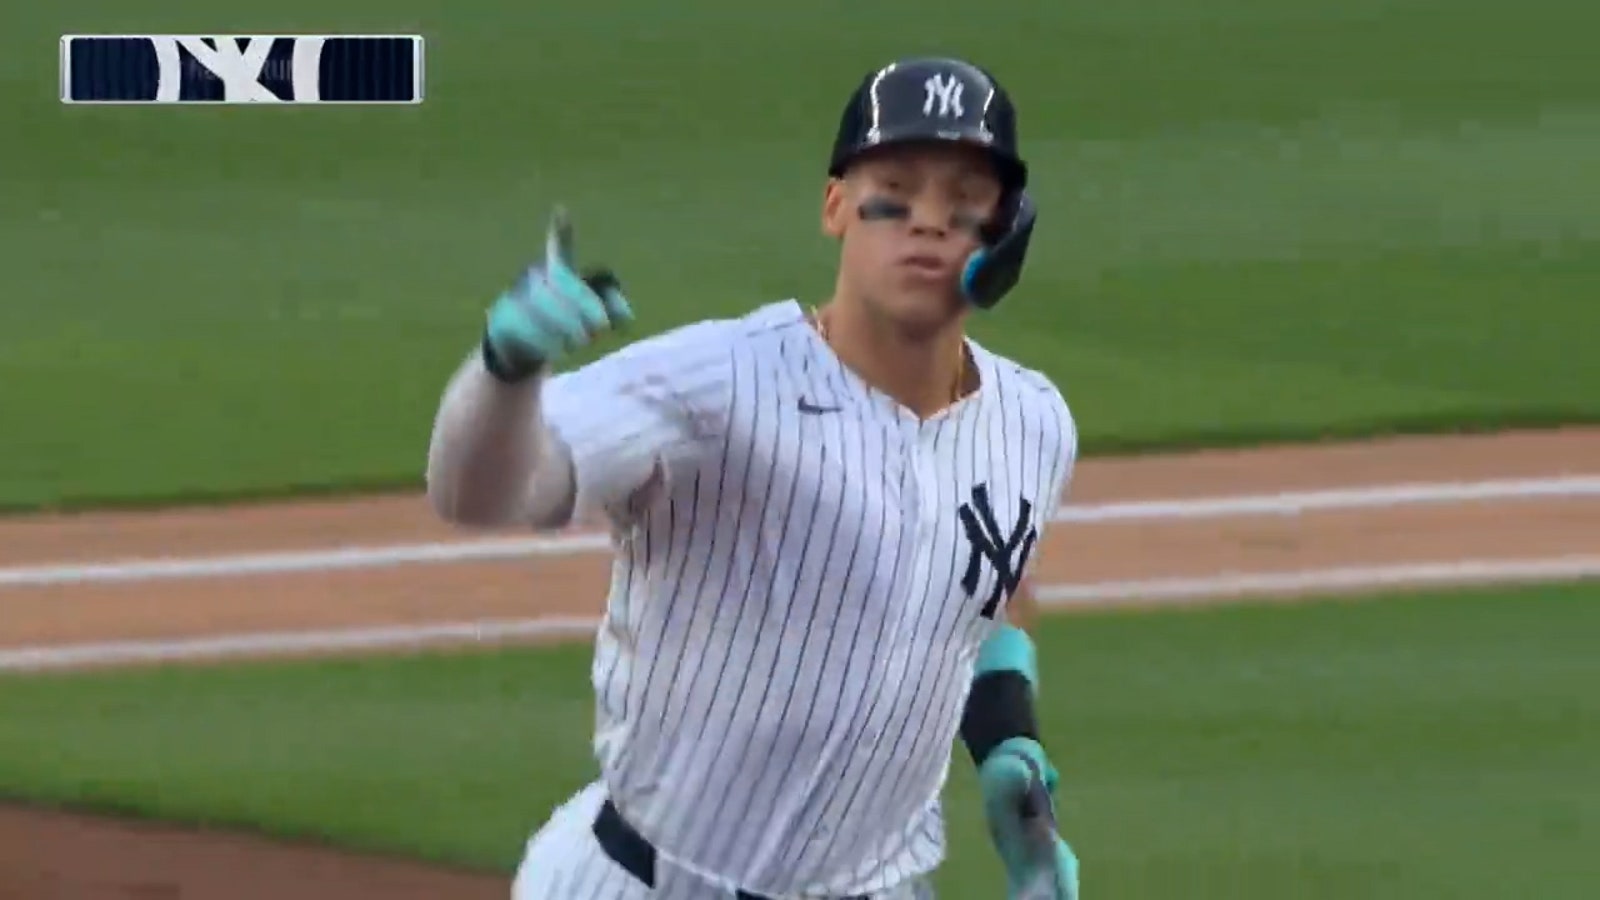 Judge DRILLS solo homer to give Yankees early lead vs. White Sox